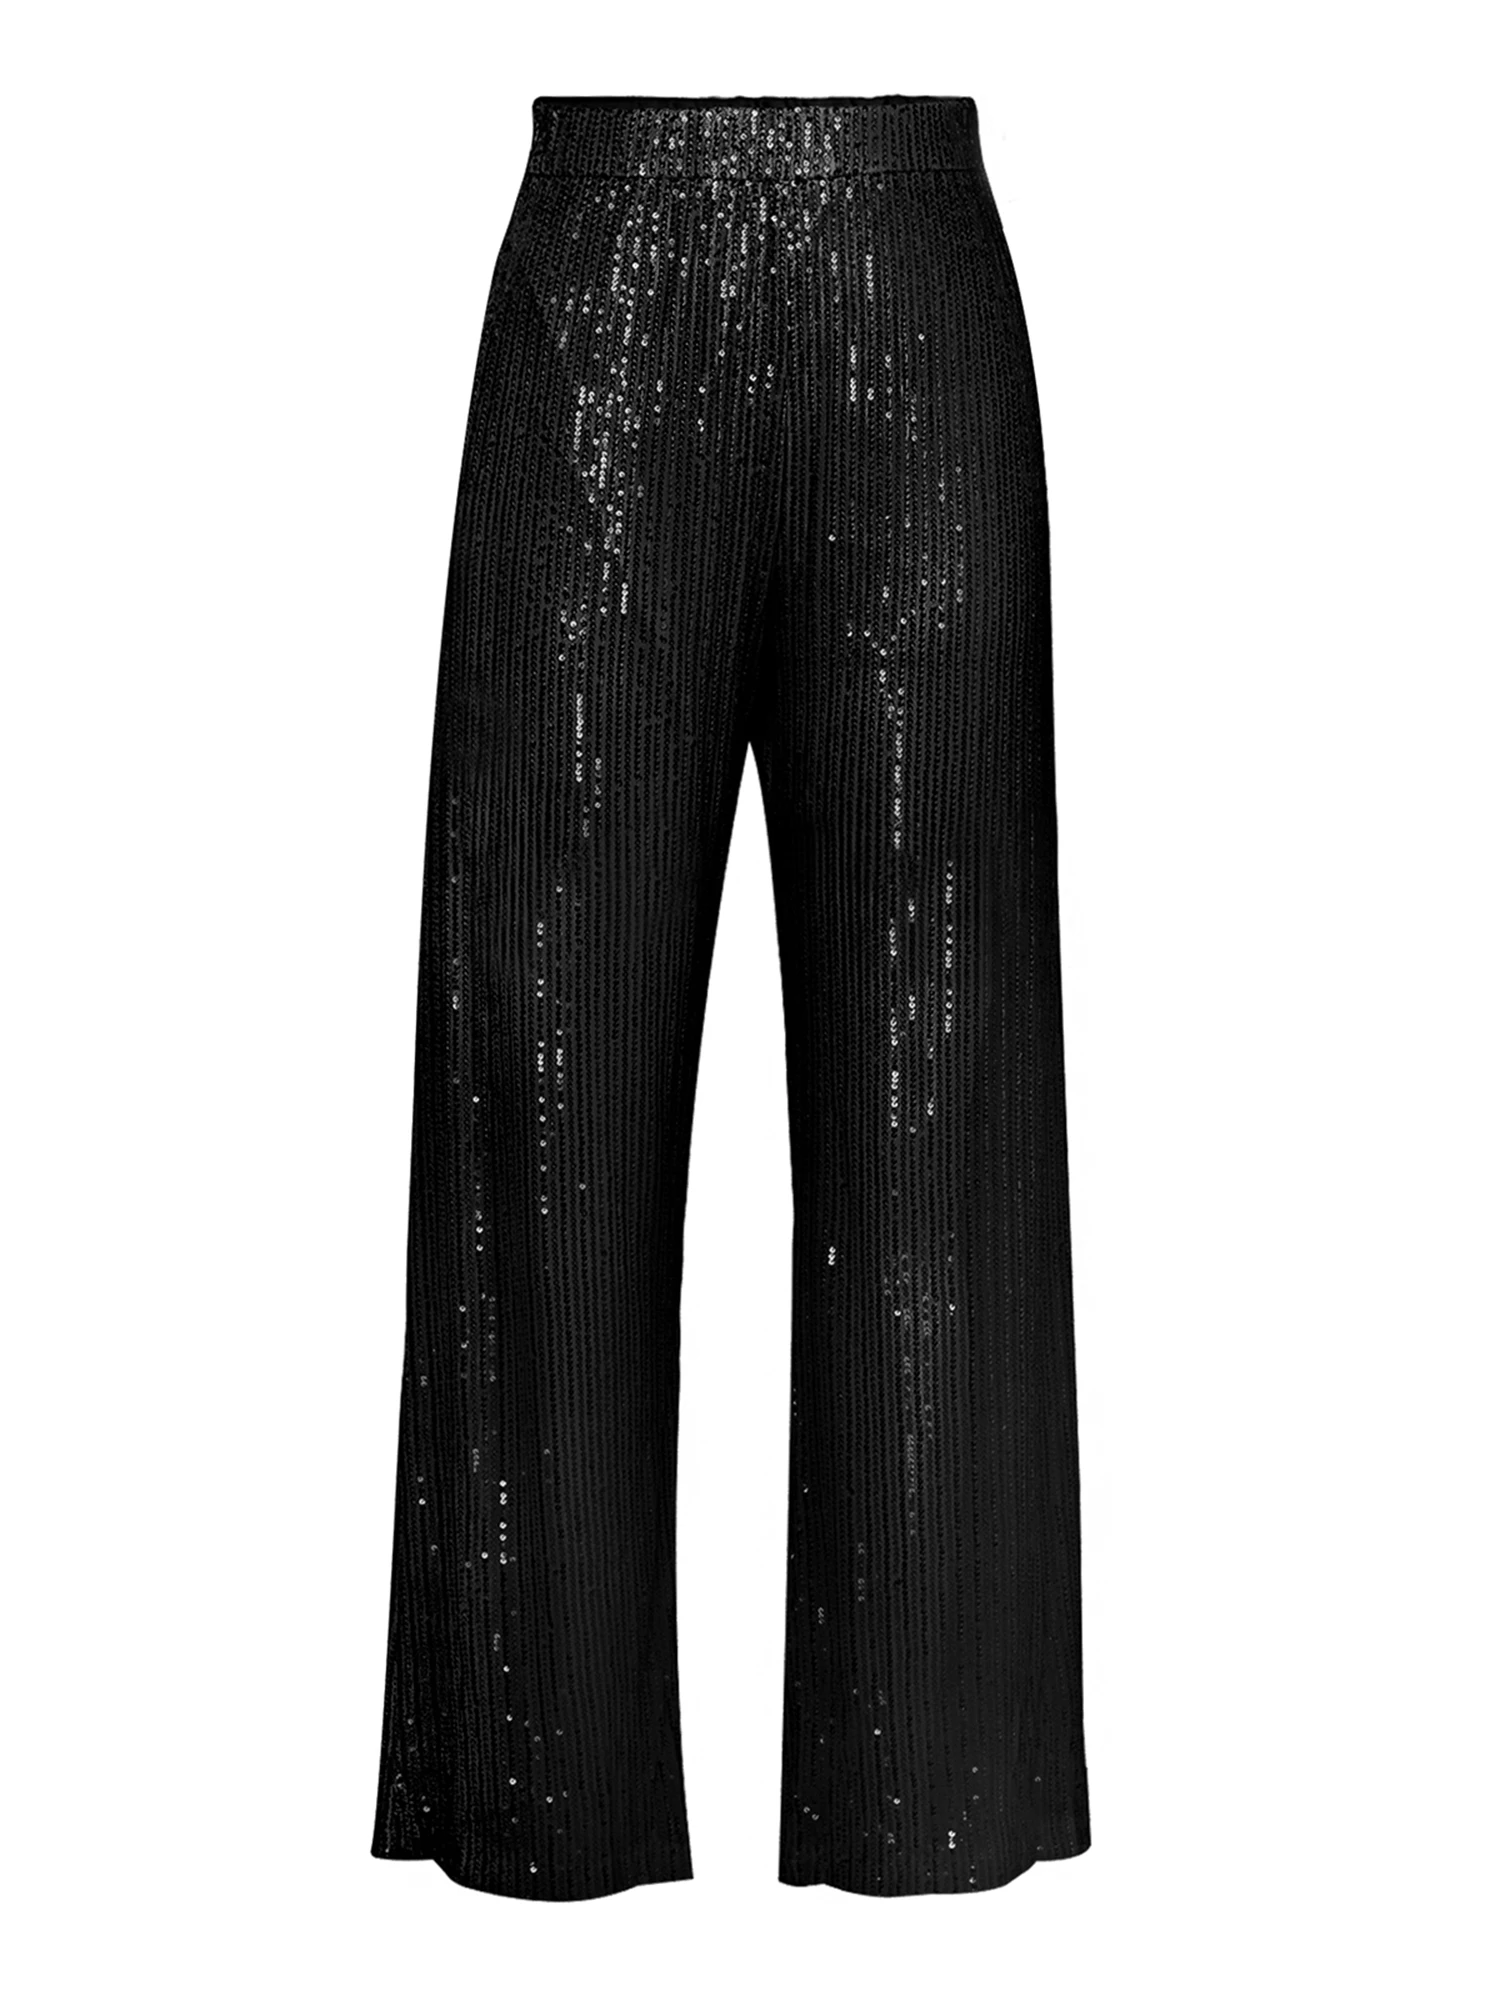 

Women Sequin Bell Bottom Pants High Waisted Wide Leg Sparkle Pants Glitter Flared Trousers for Party Clubwear